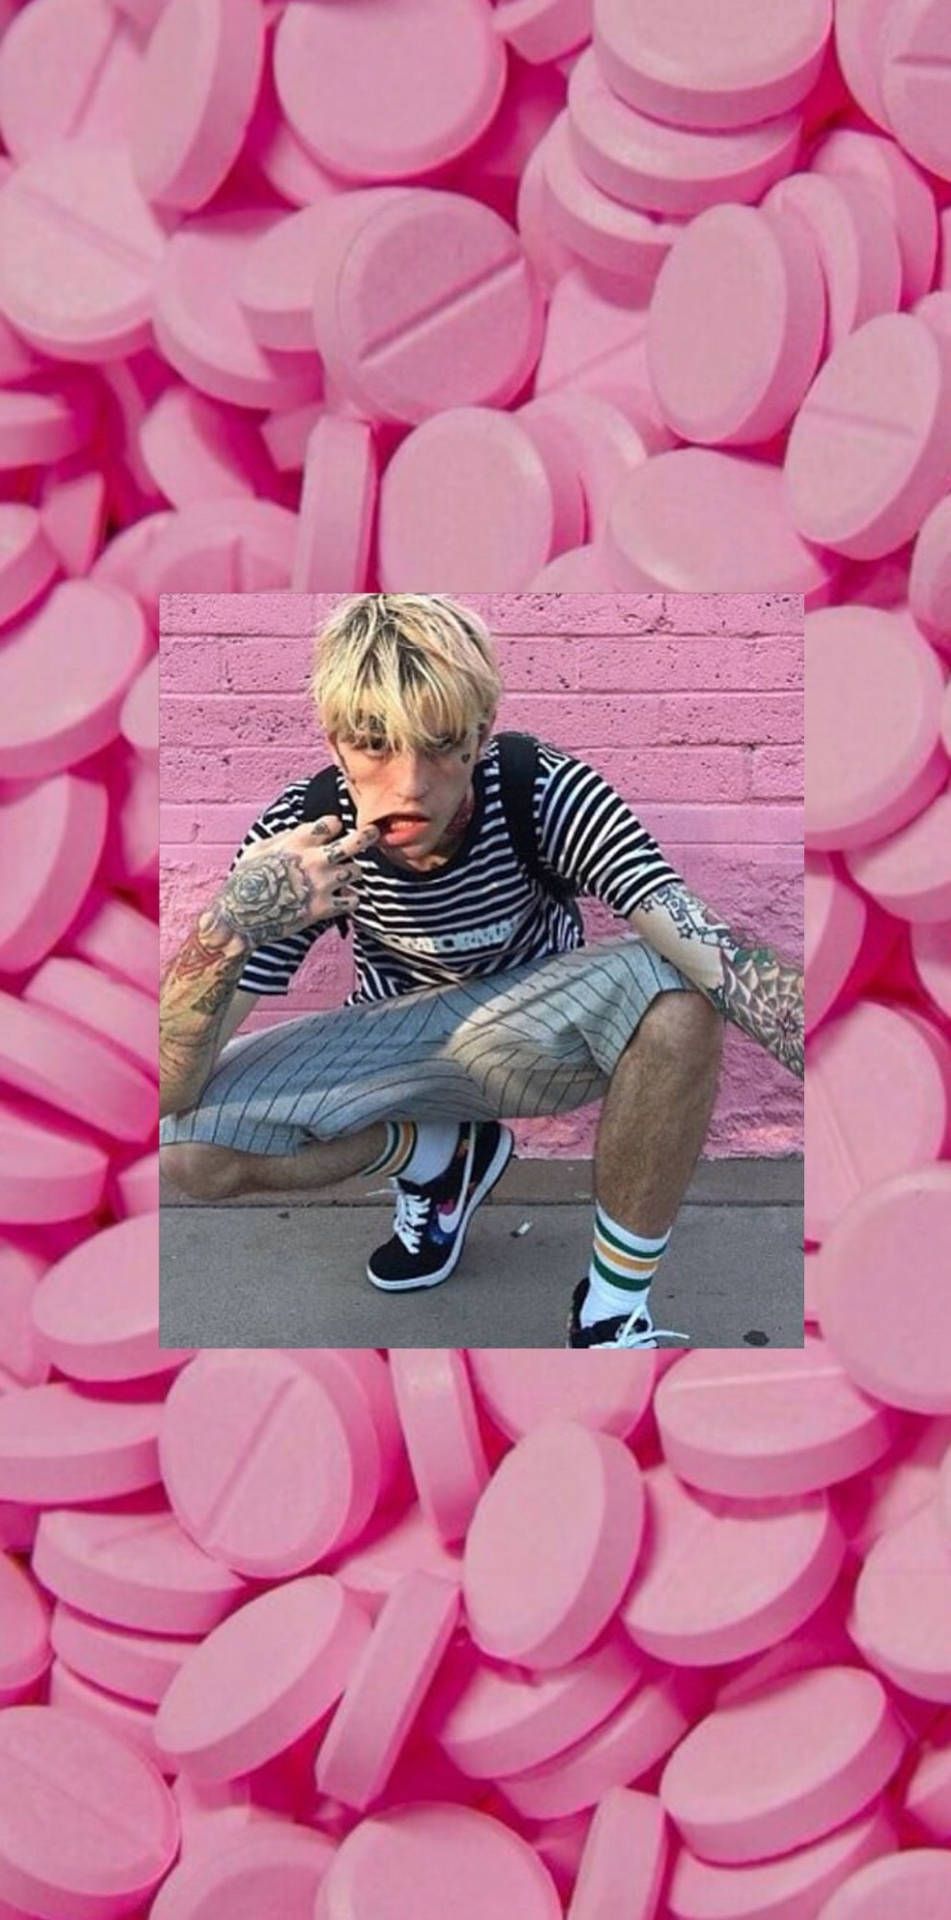 A man is sitting on the ground with pink pillows - Lil Peep